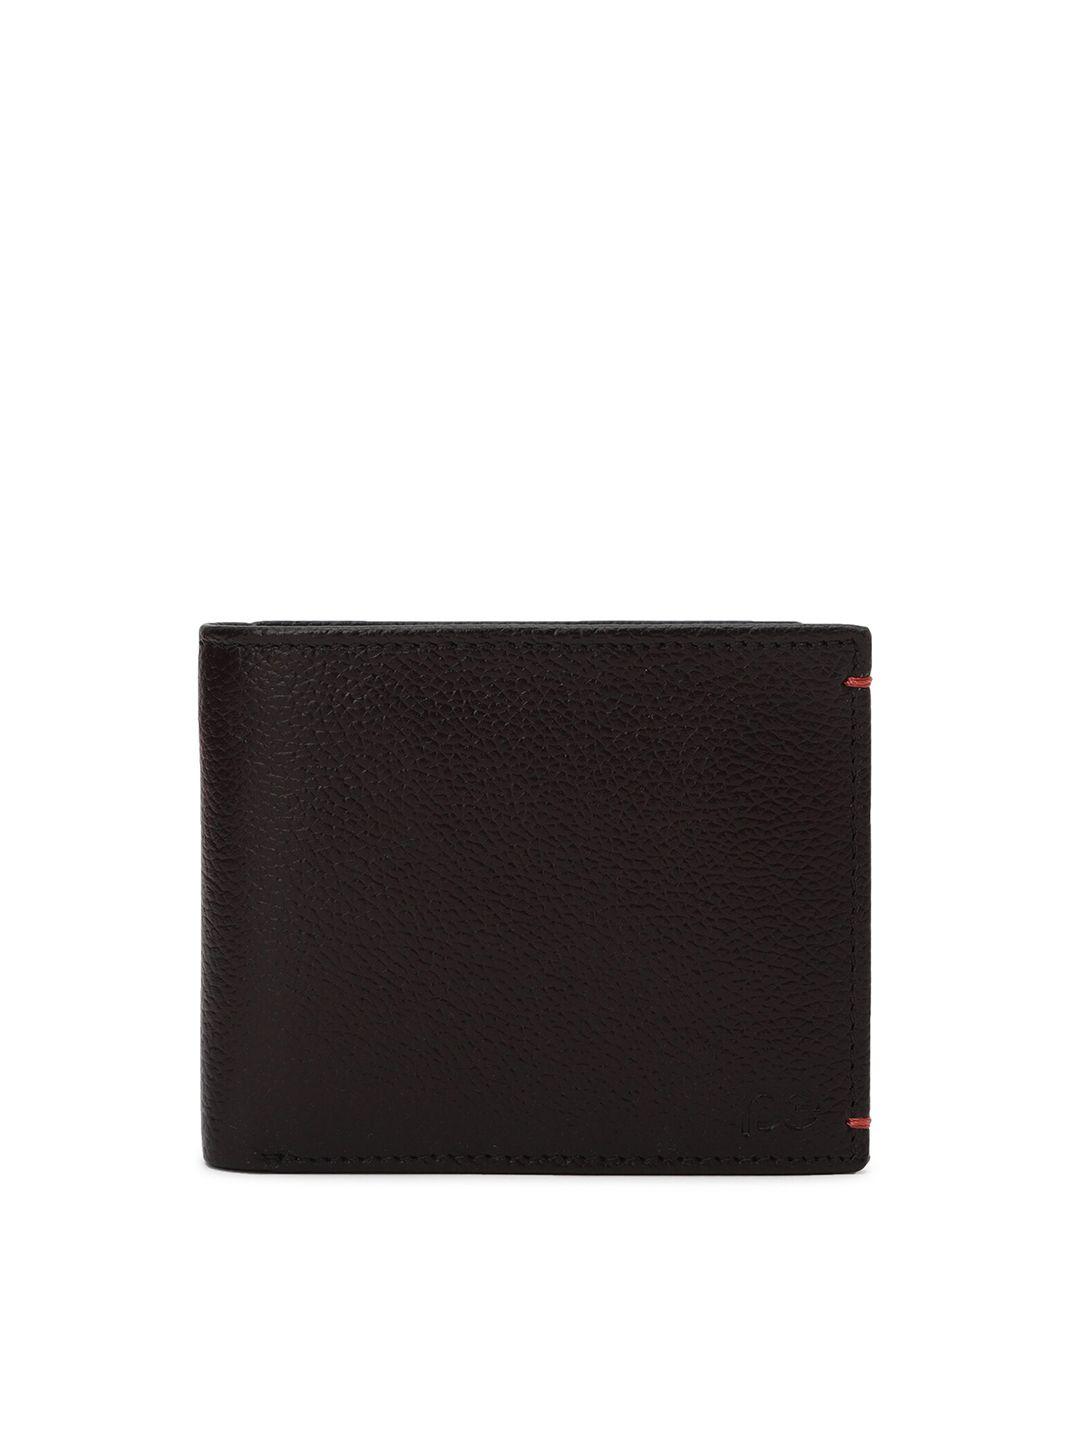 peter-england-men-black-leather-two-fold-wallet